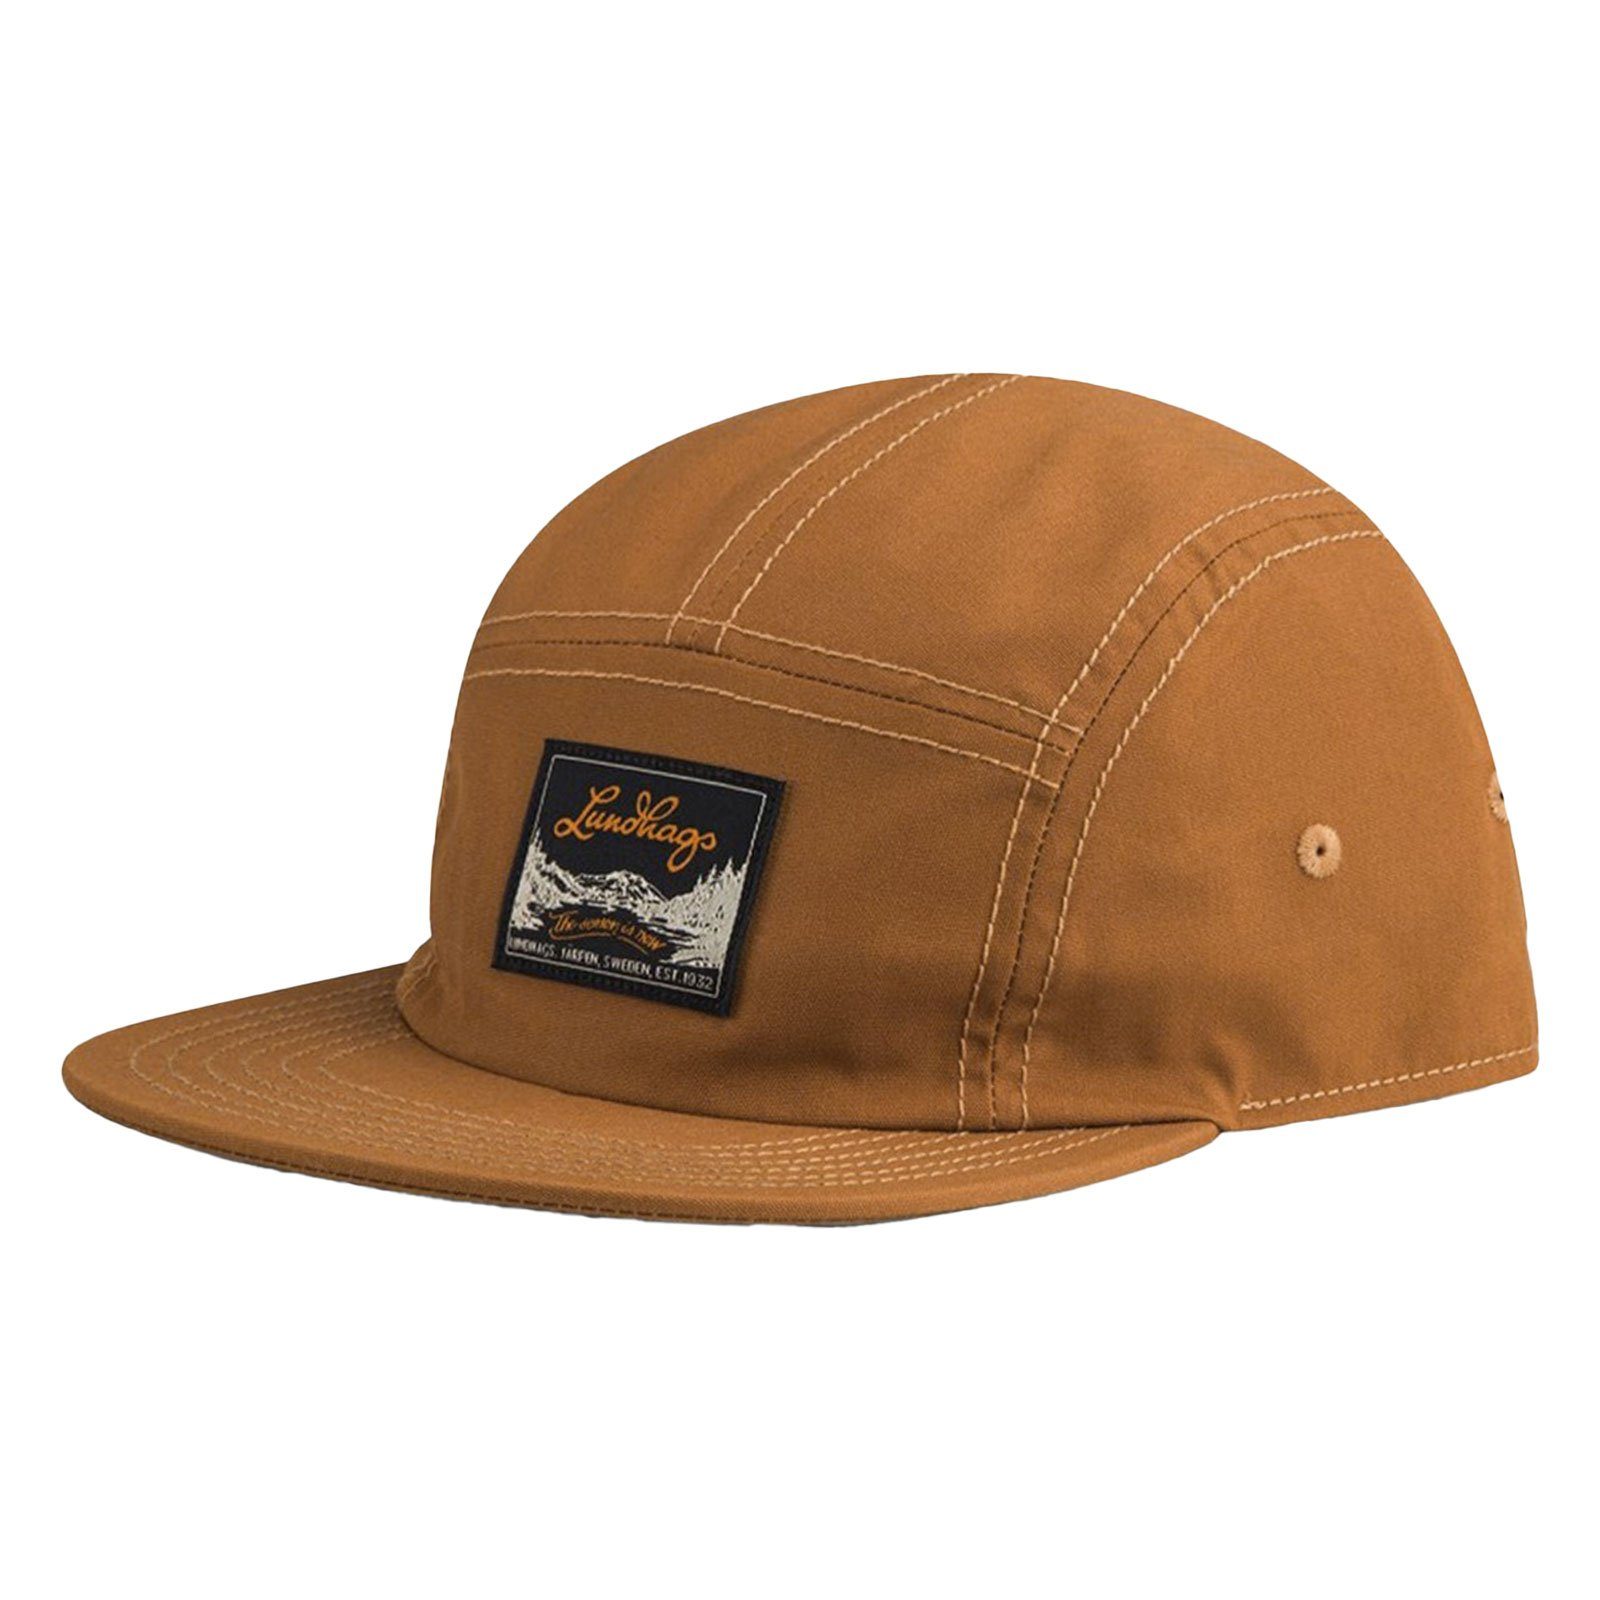 Lundhags Fitted Cap Core Cap mit Marken-Patch